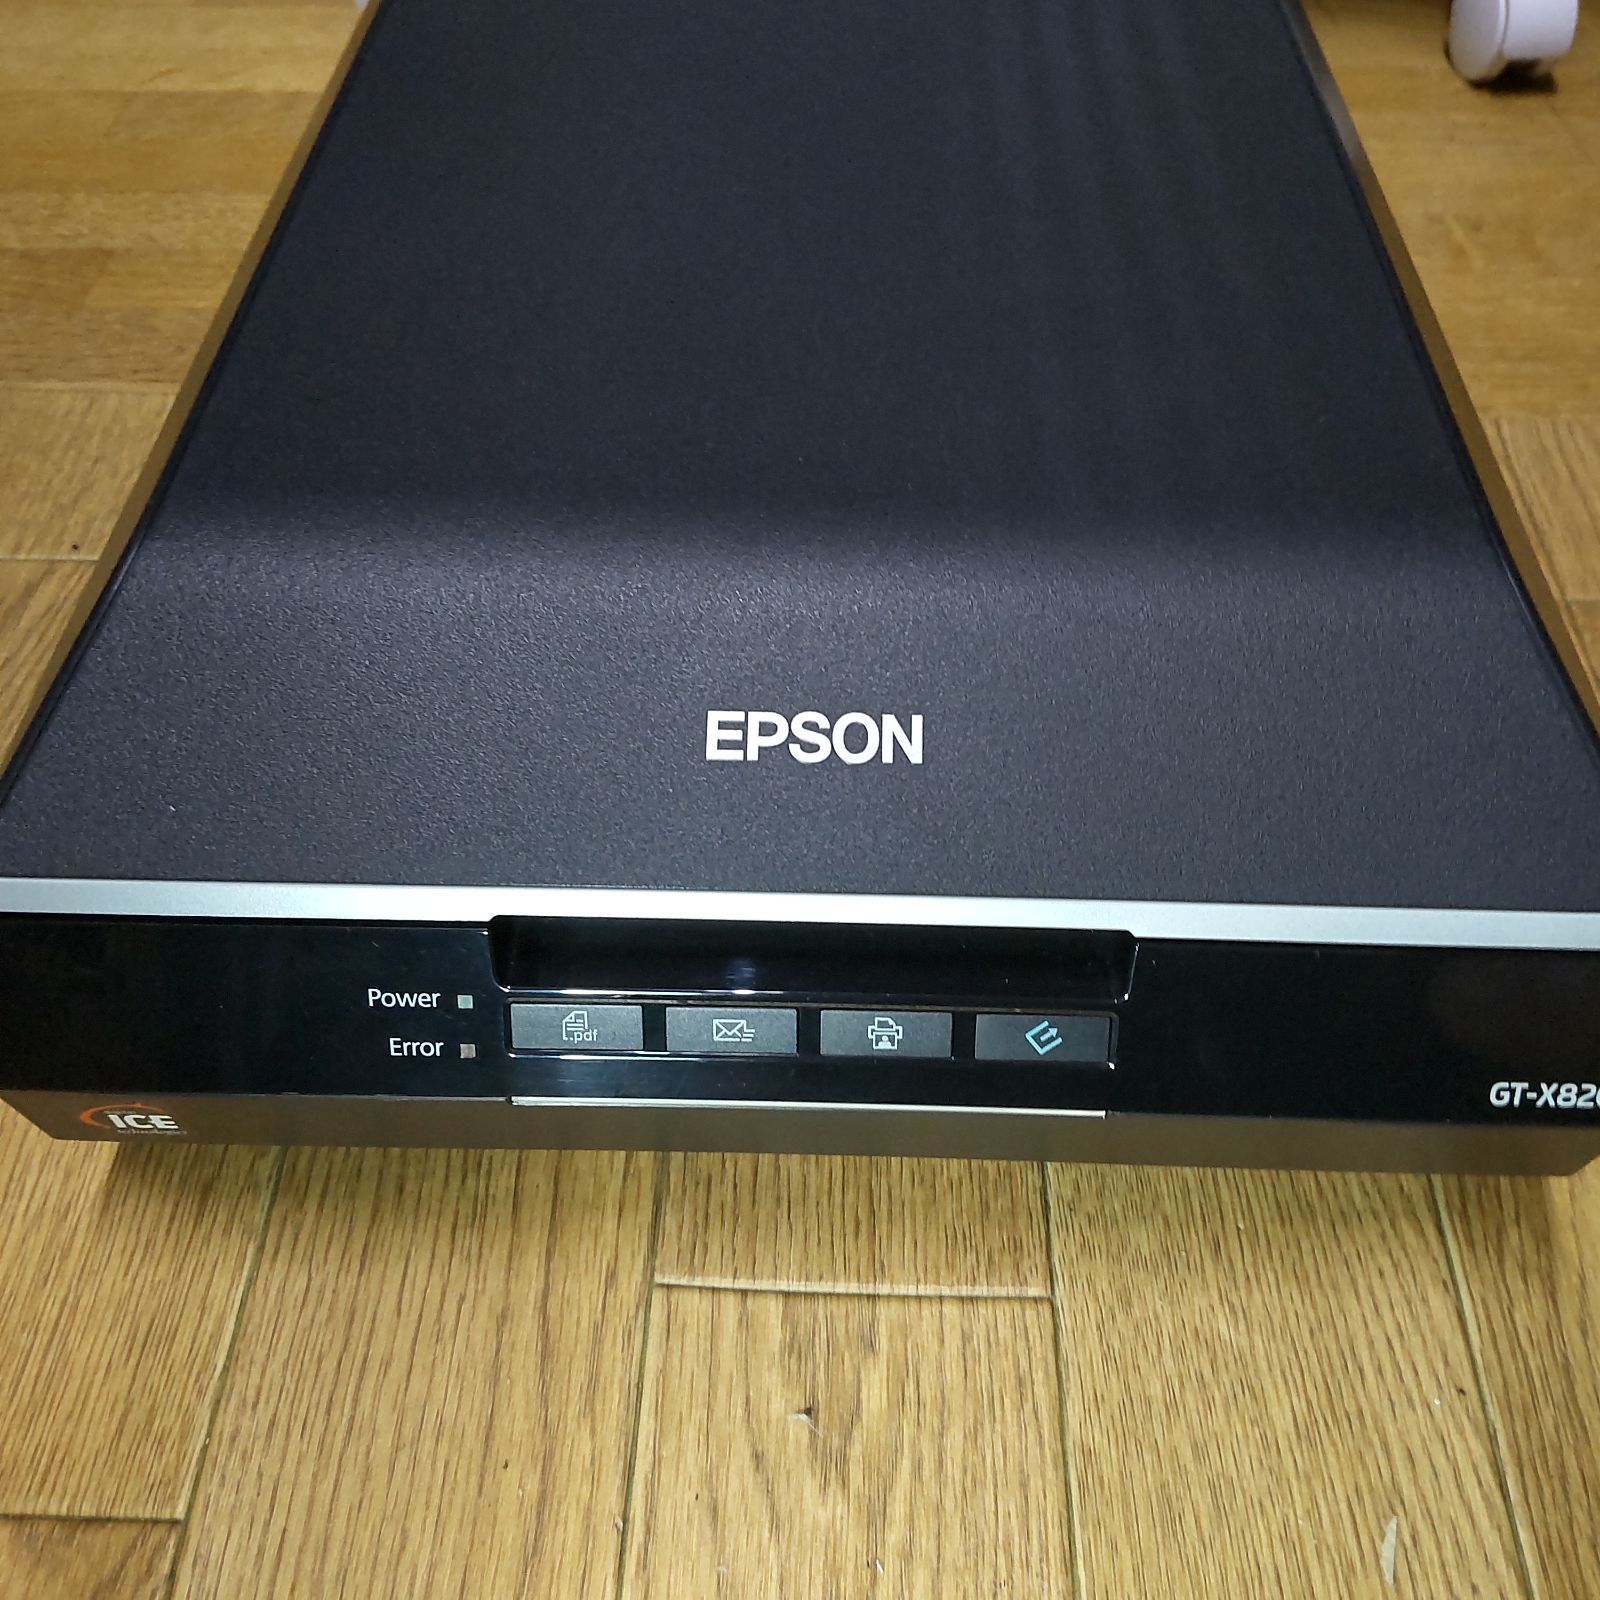 EPSON GT-X820 フィルムスキャナー フィルムホルダー付属 動作良好 